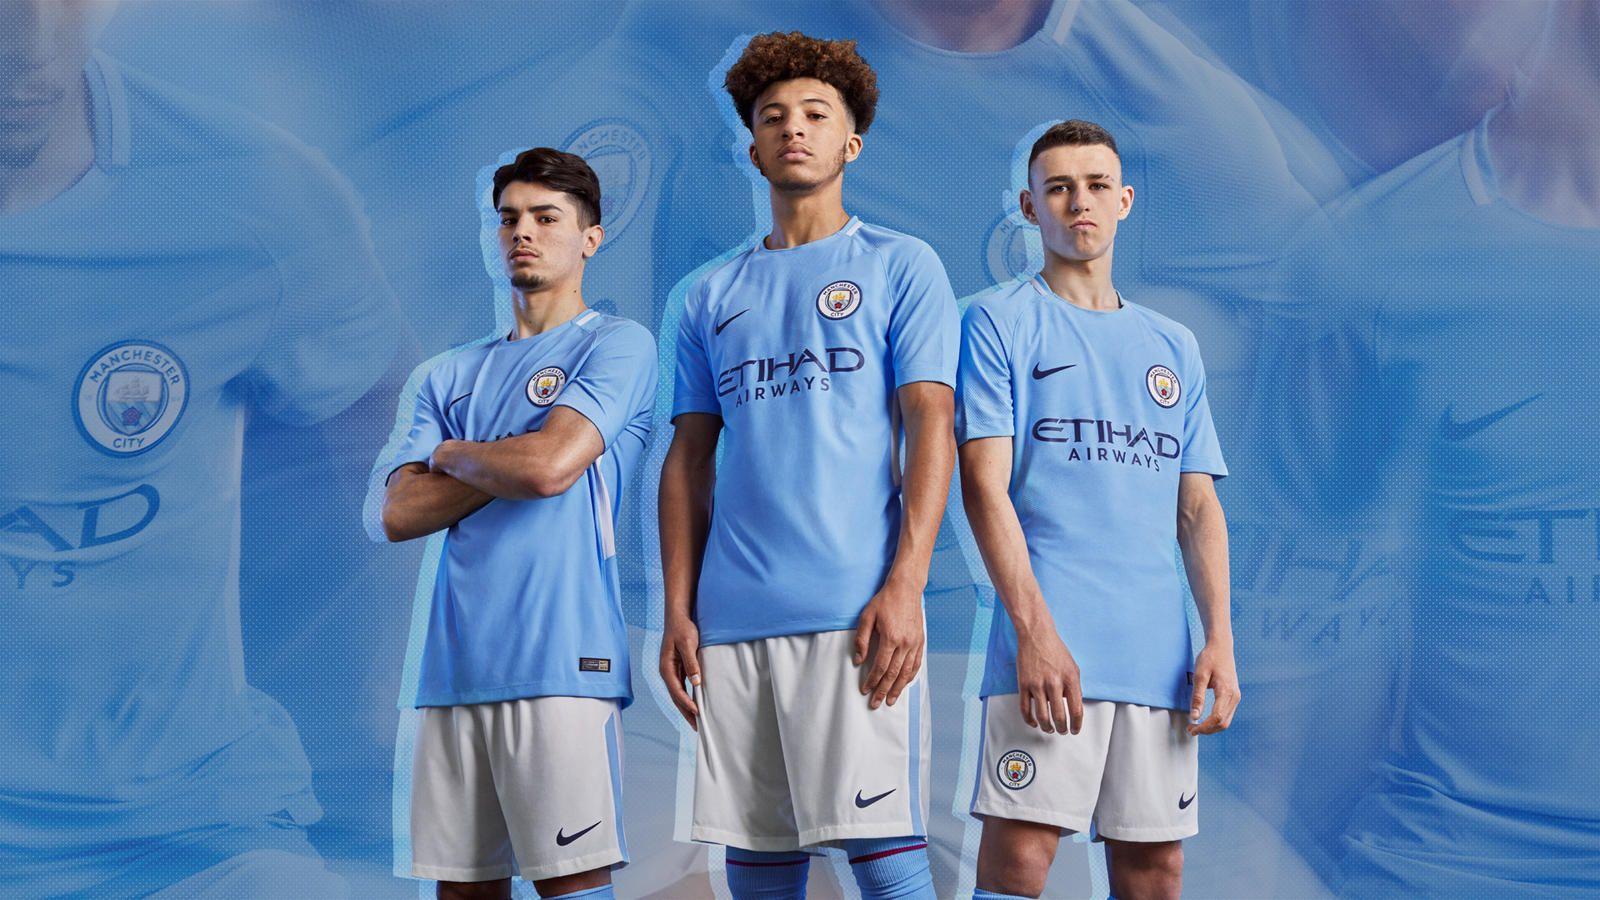 Years On, Nike Reinvents A Classic For Manchester City's 2017 18